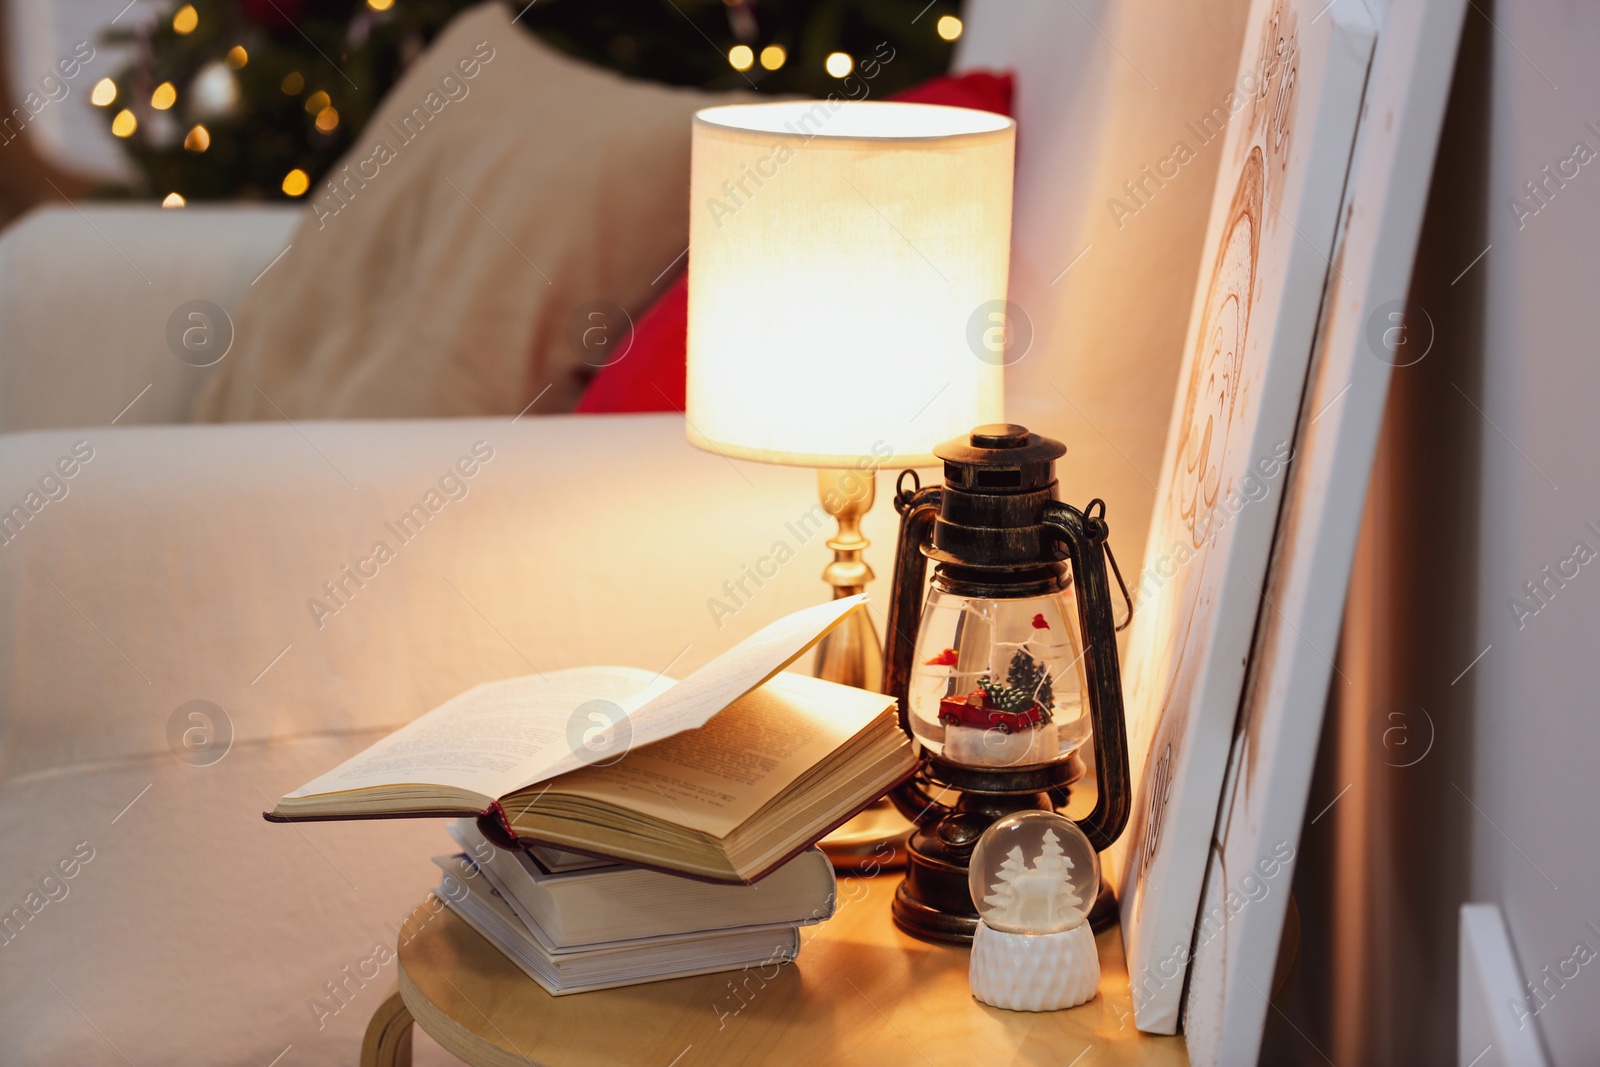 Photo of Books, snowglobes and lamp on wooden table in room. Christmas decor